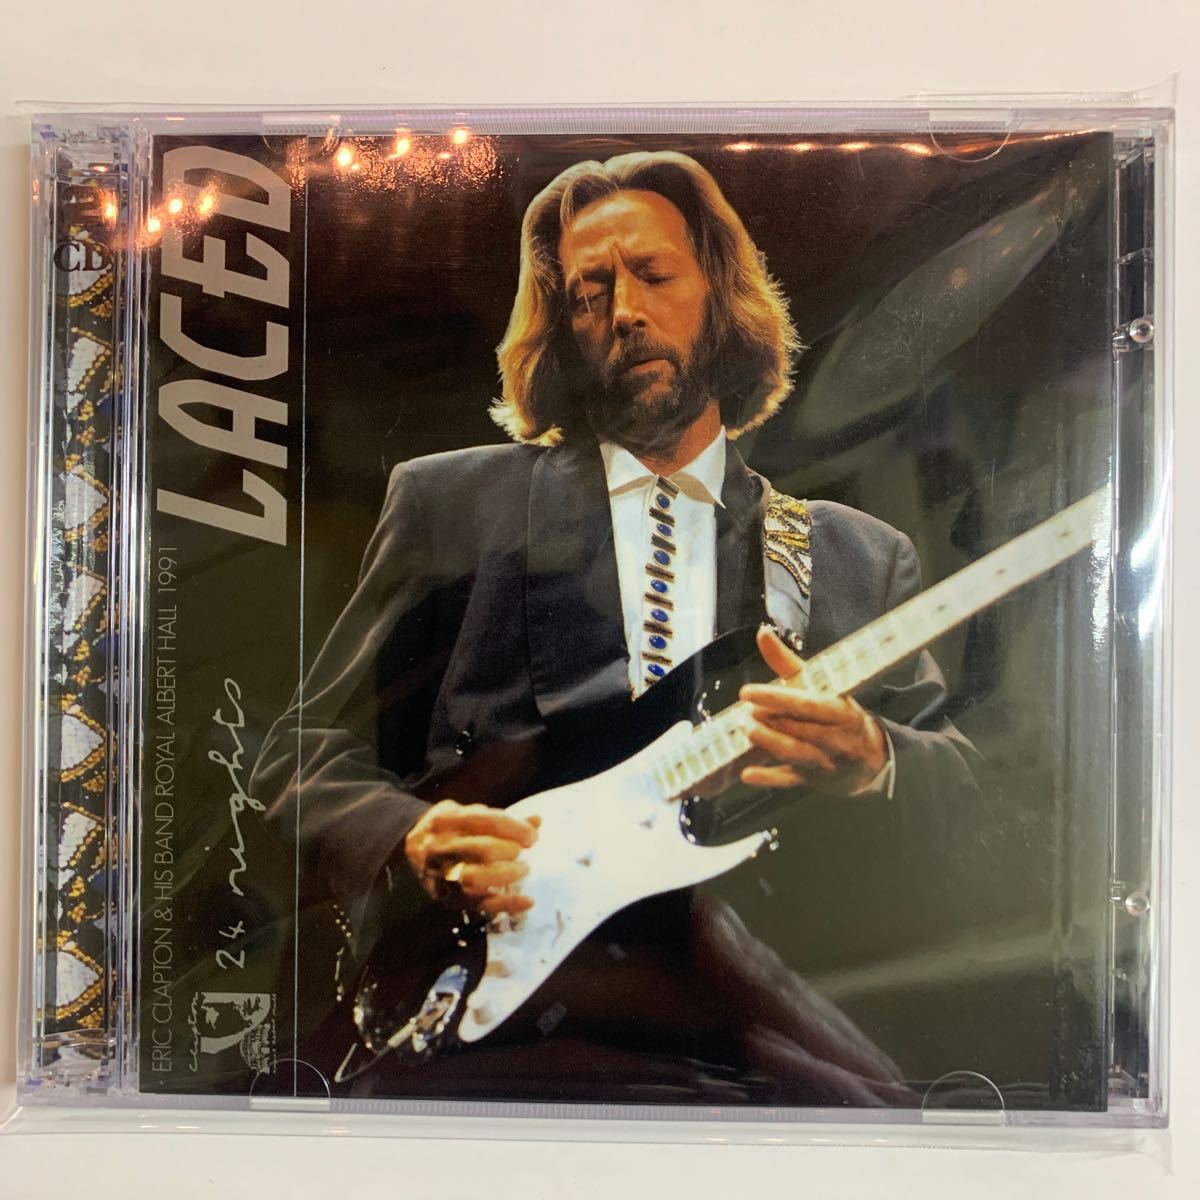 ERIC CLAPTON / LACED (2CD) Mid Valley Records MVR-168/169 2003年度リリース作品「廃盤」